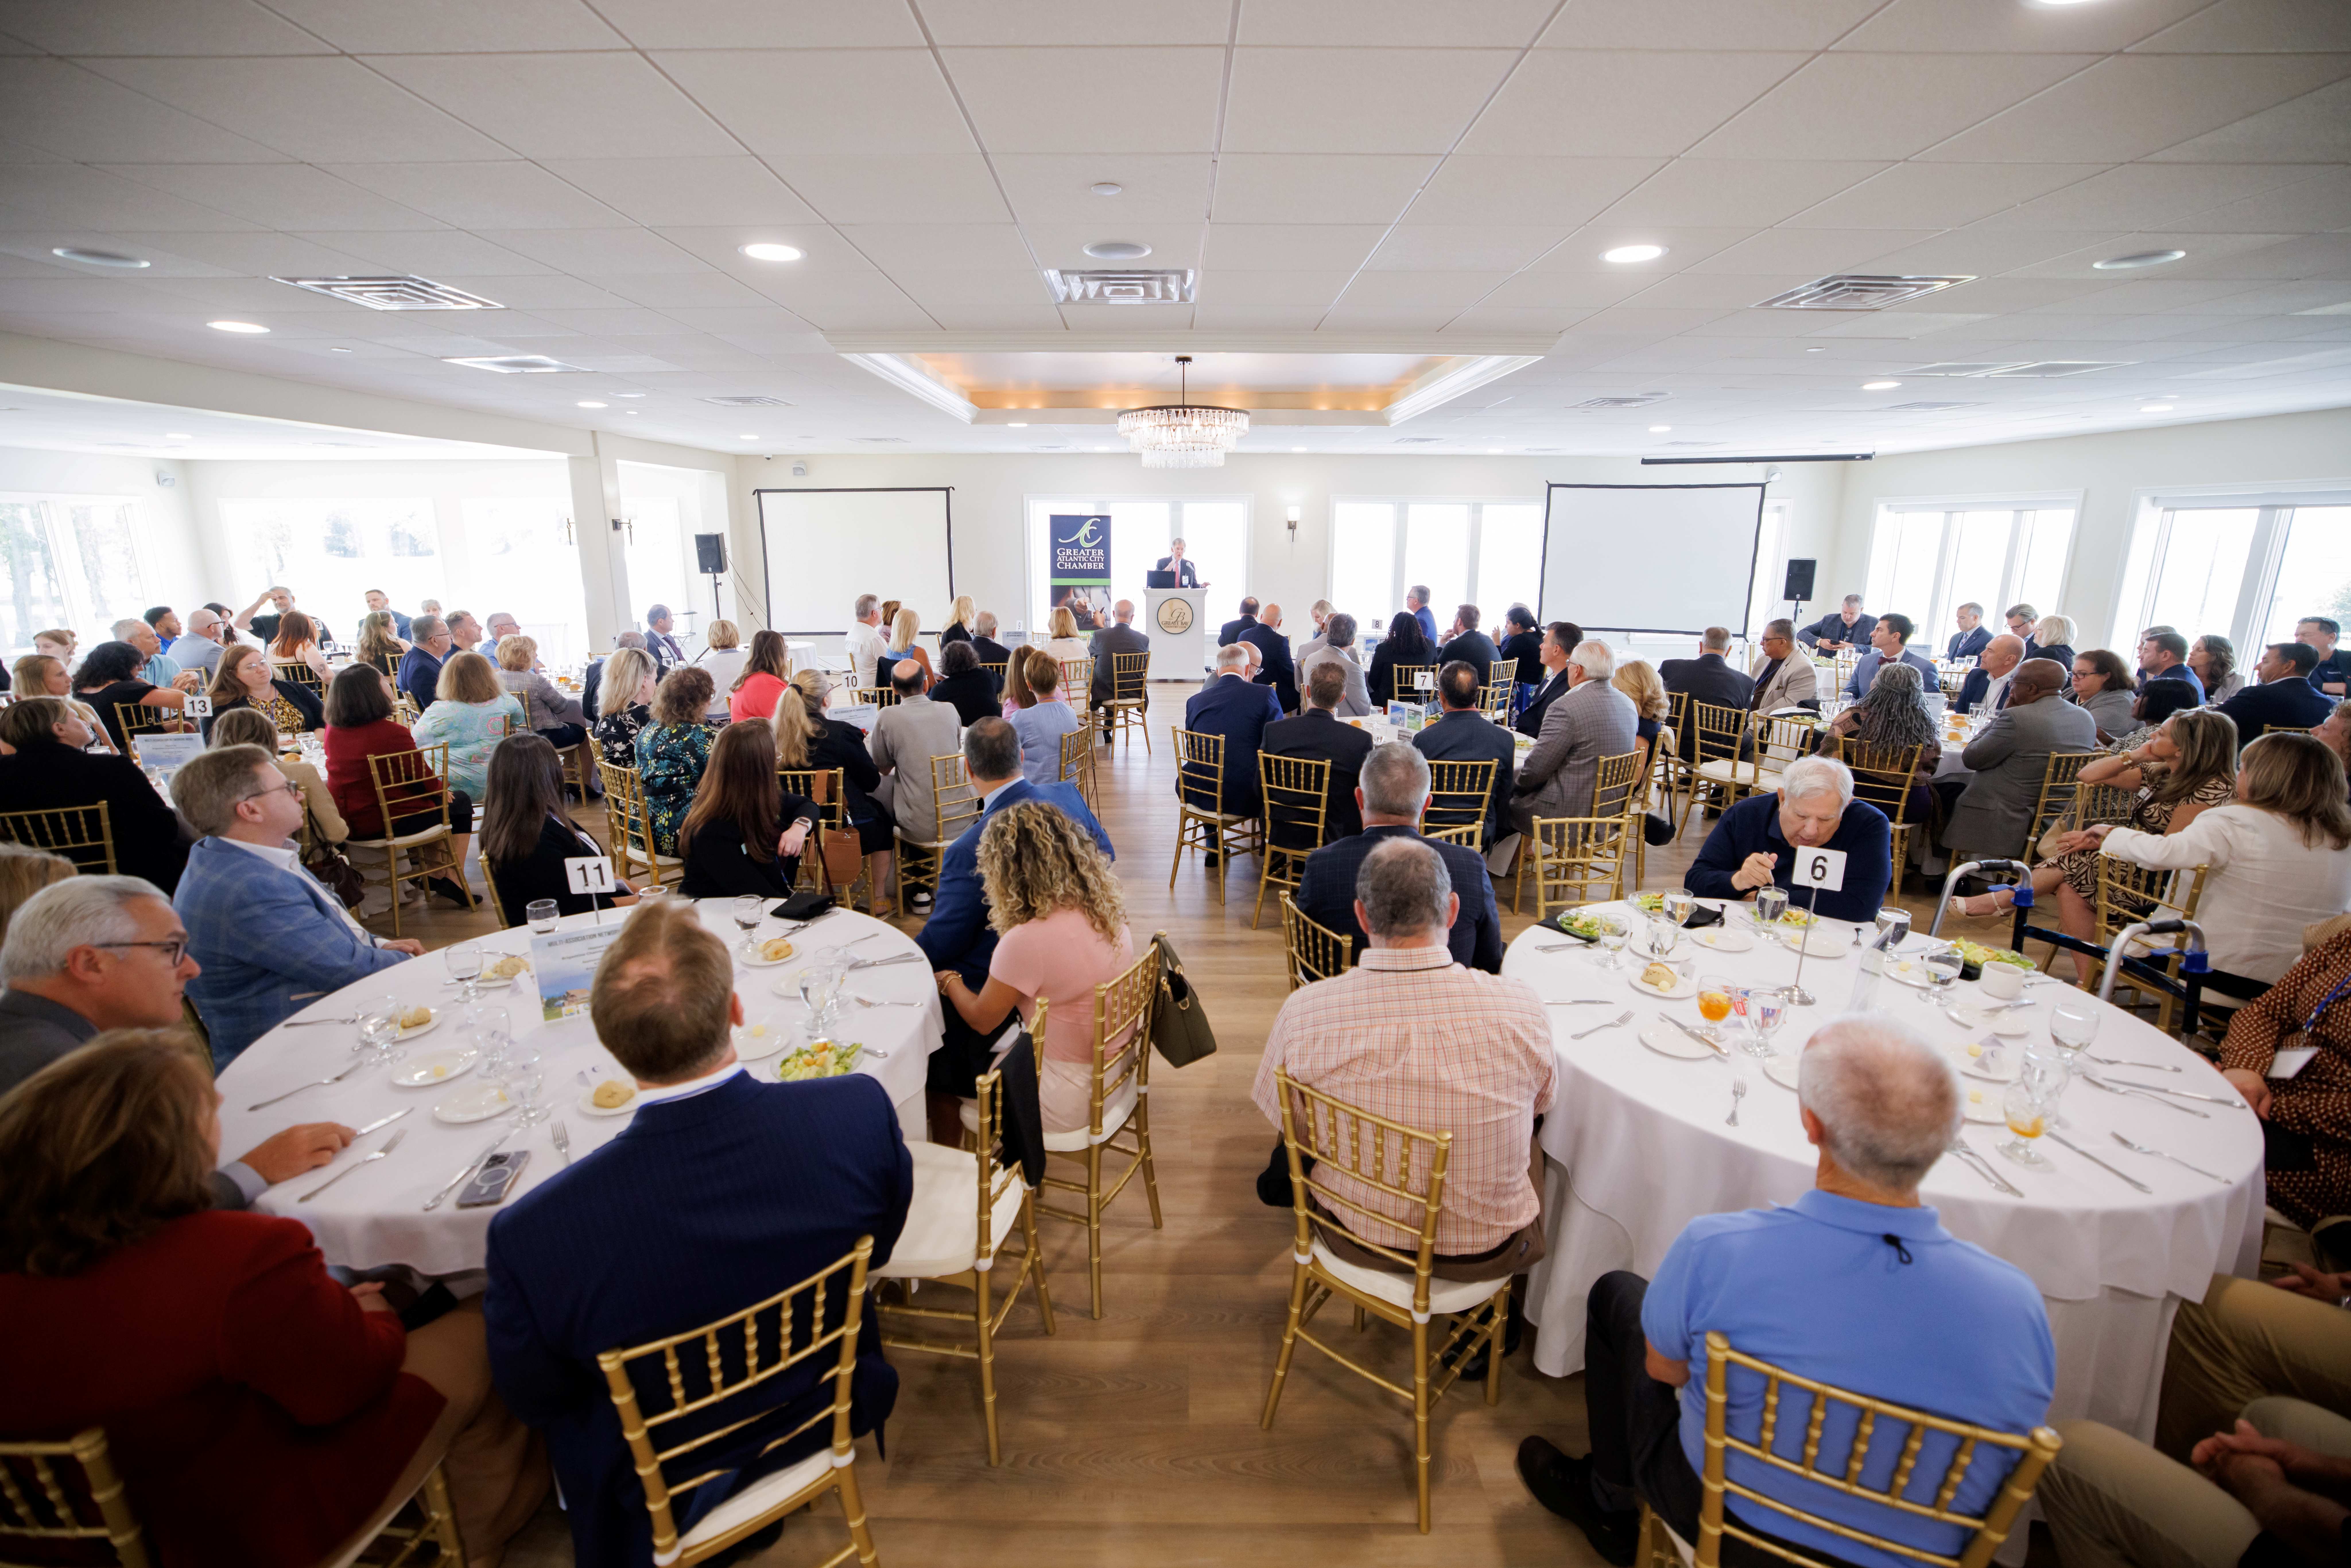 2023 GACC Annual Luncheon Recap: Looking Forward to Involvement and Collaboration